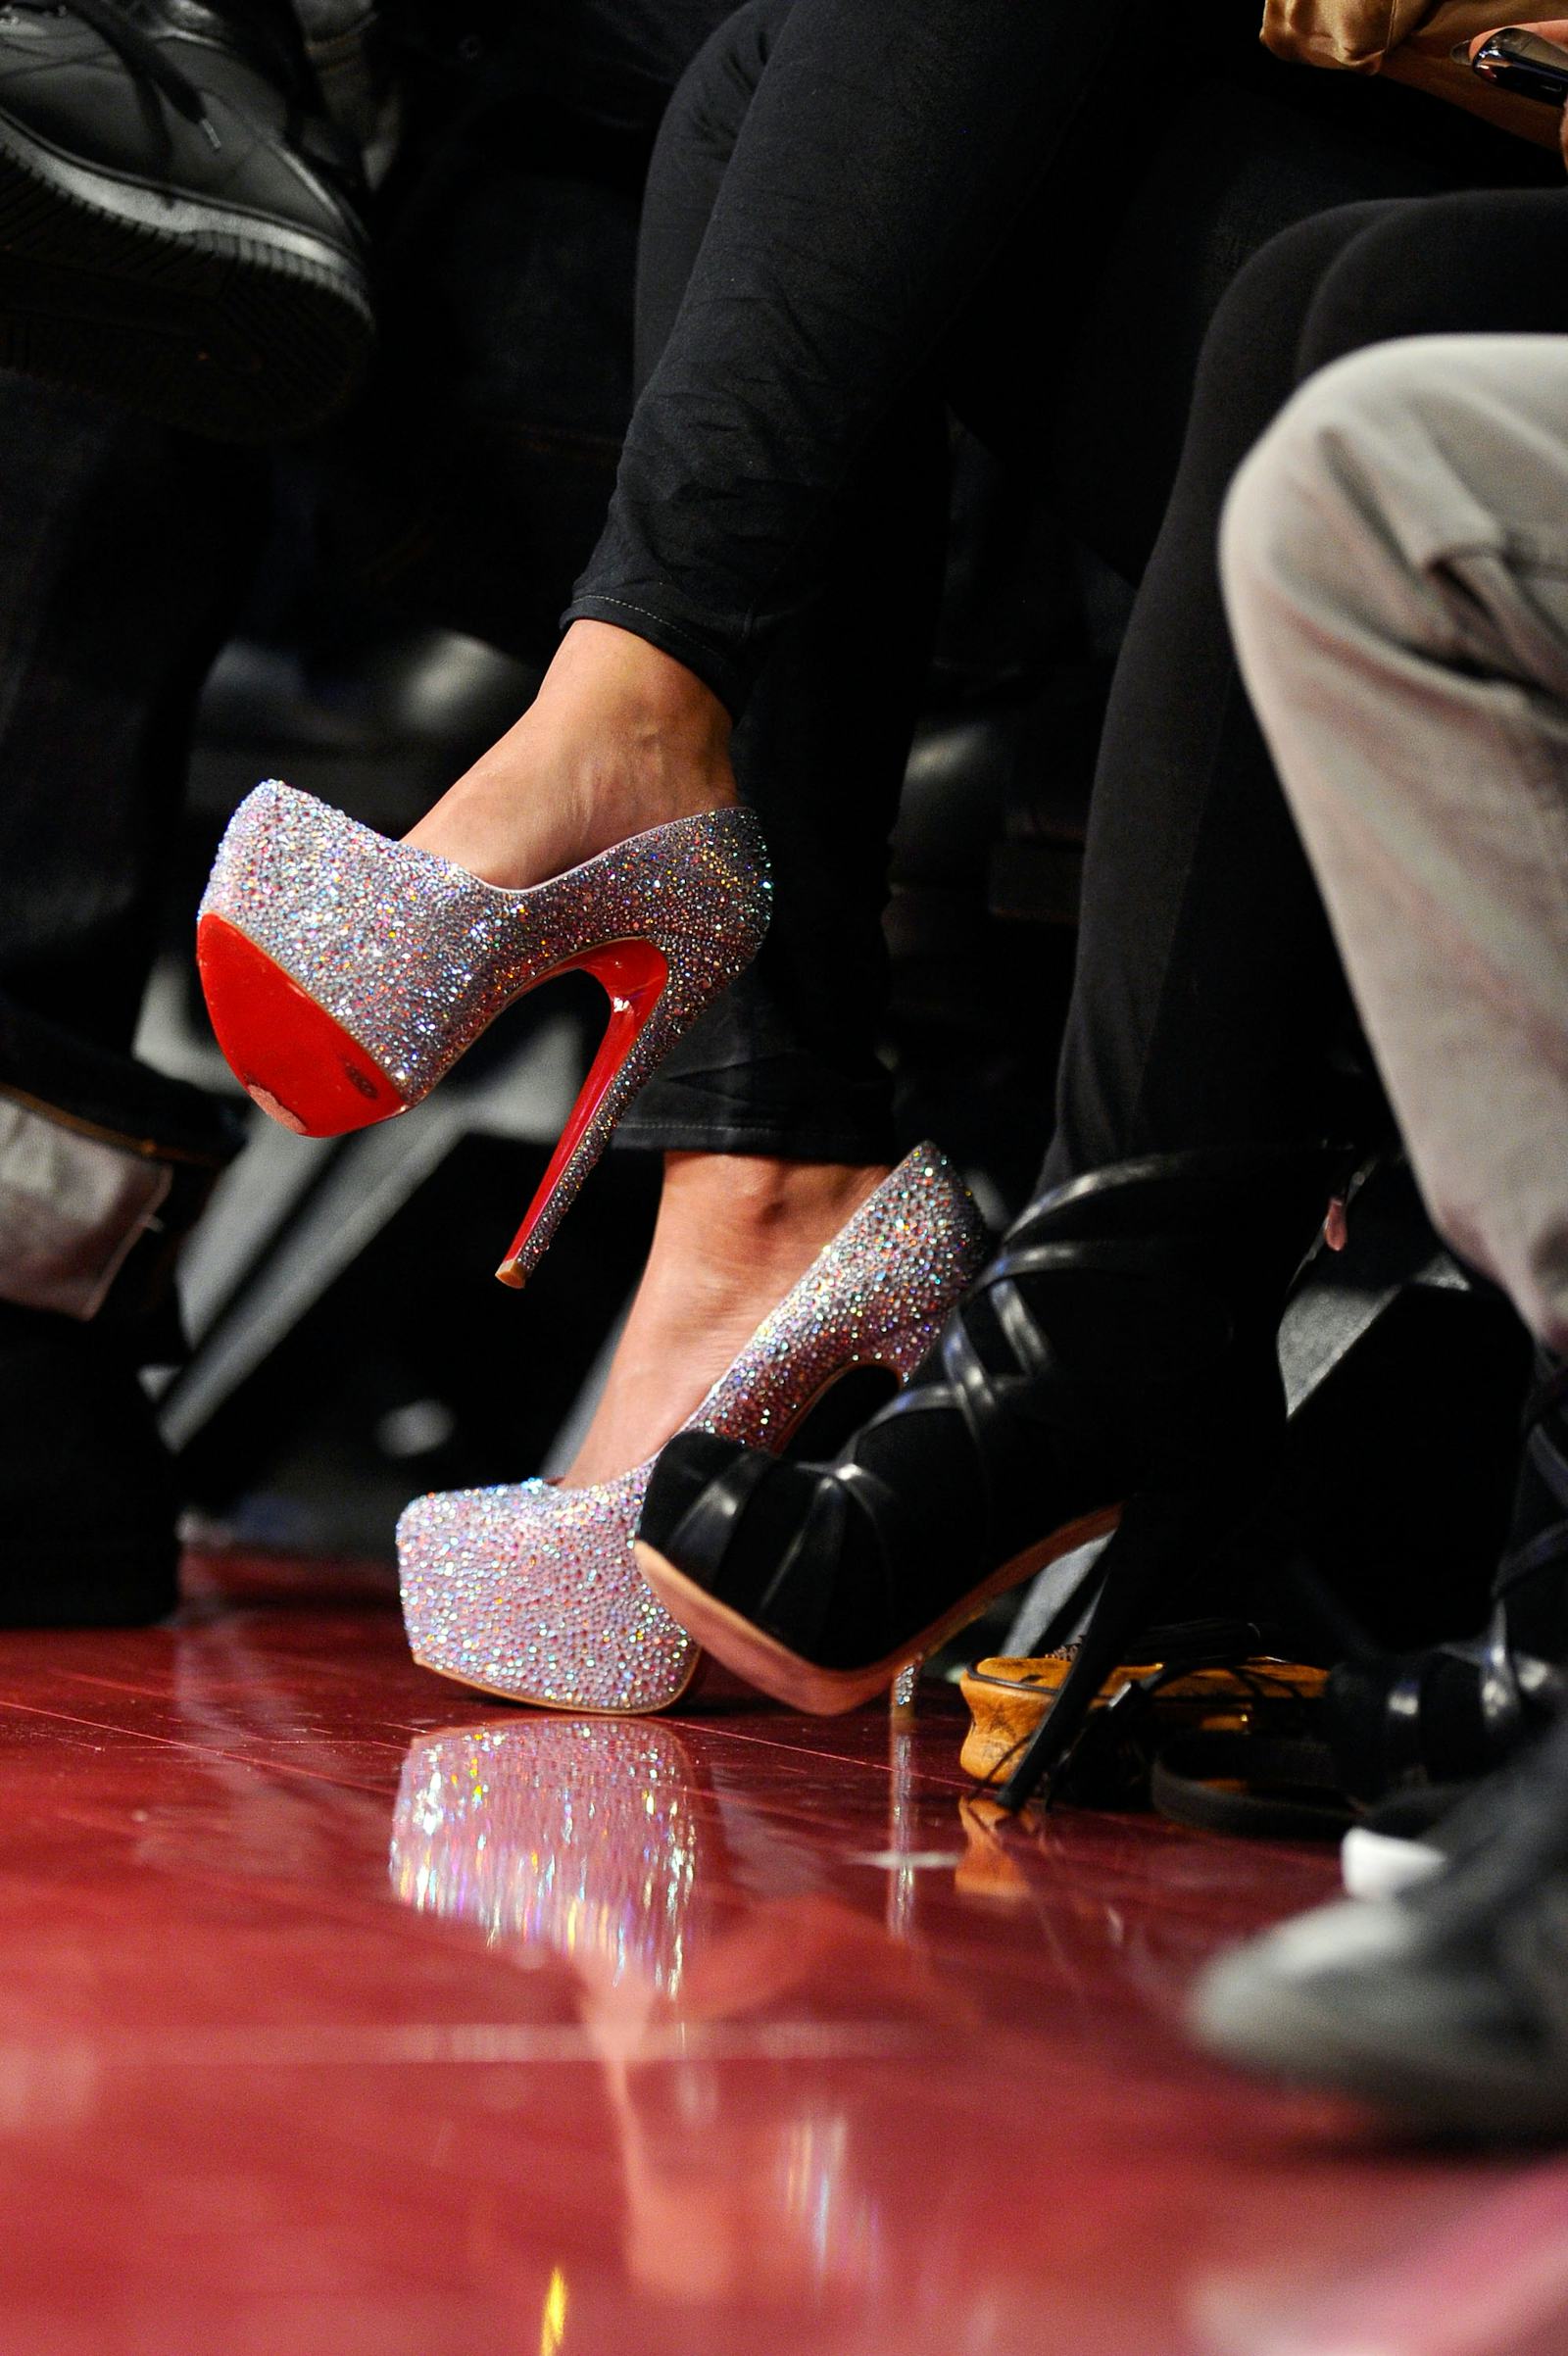 Diy Christian Louboutin Daffodile Strass Heels For Only 40 Bucks Are Super Impressive